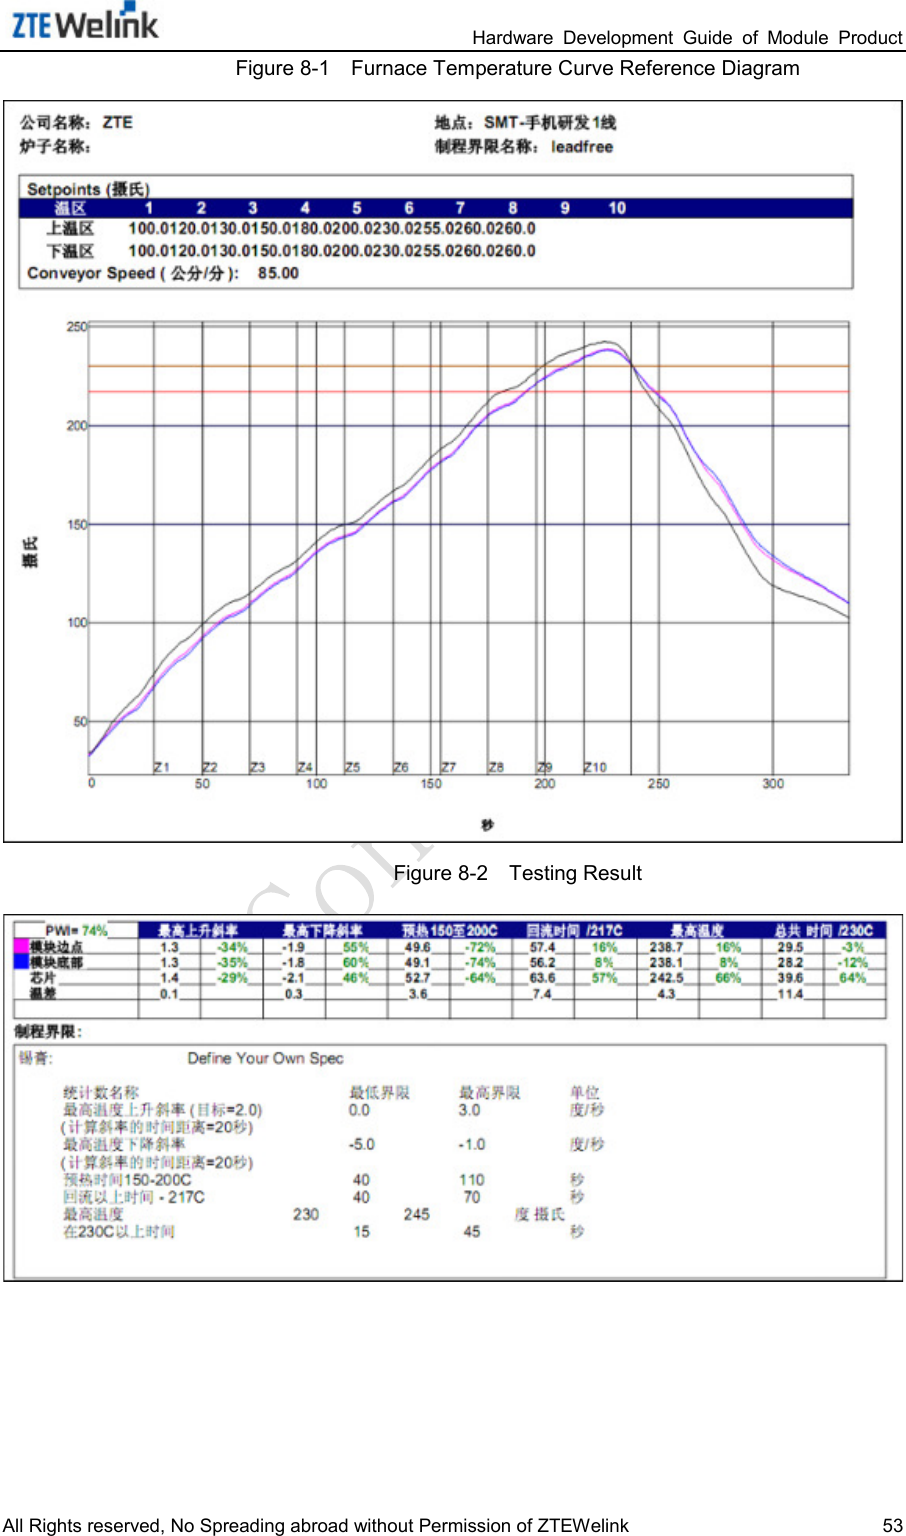                                                                 Hardware  Development  Guide  of  Module  Product All Rights reserved, No Spreading abroad without Permission of ZTEWelink 53 Figure 8-1    Furnace Temperature Curve Reference Diagram  Figure 8-2    Testing Result  